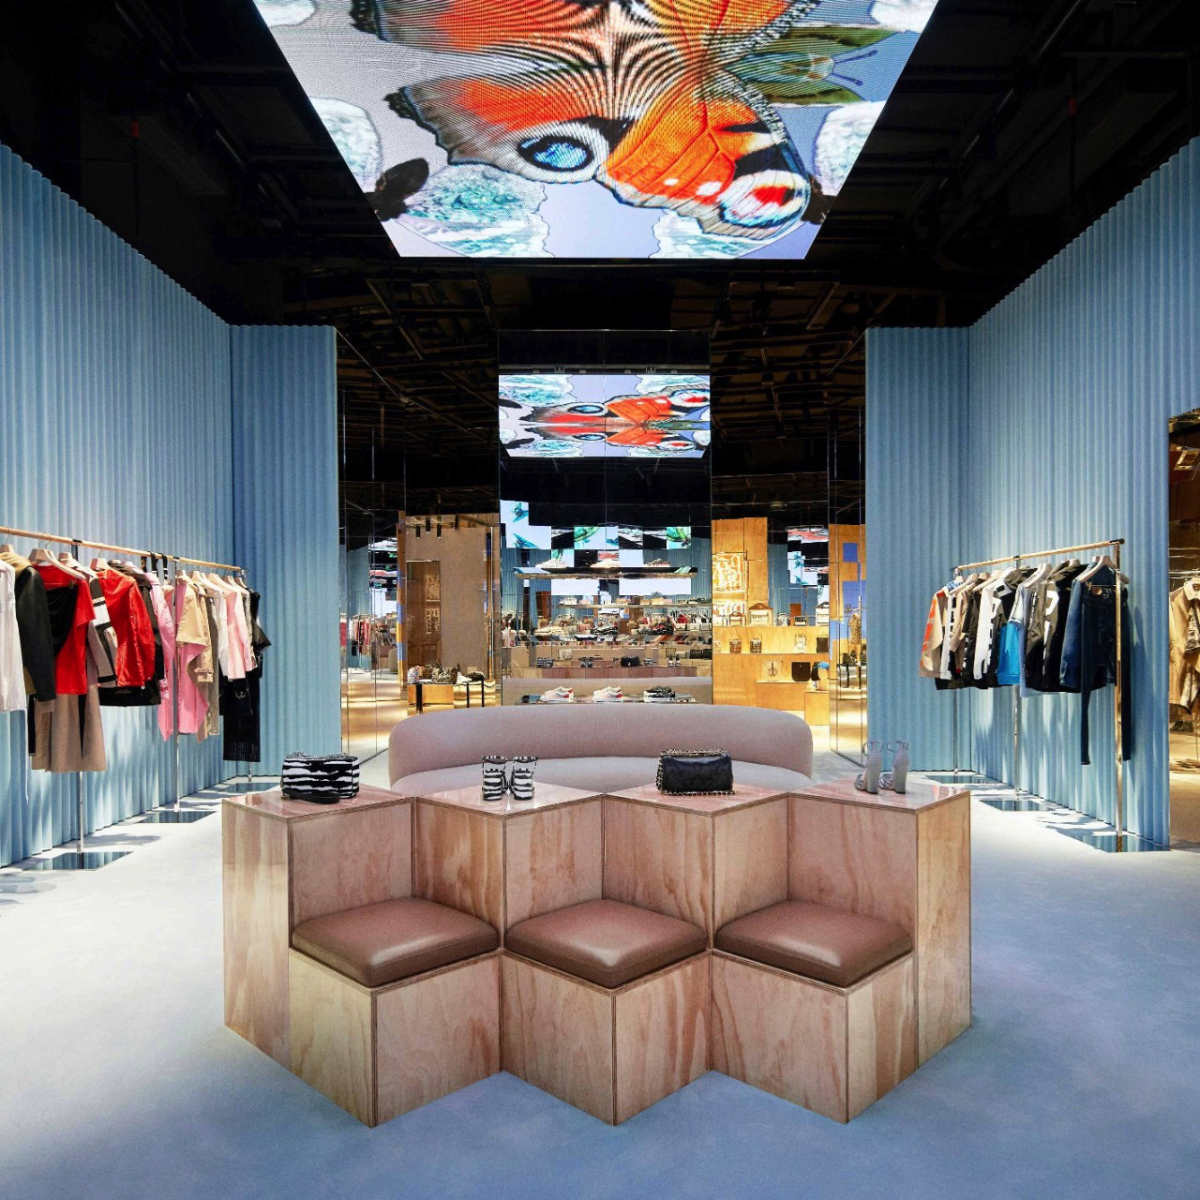 New openings of luxury boutiques - July 2020 - Luxferity Magazine